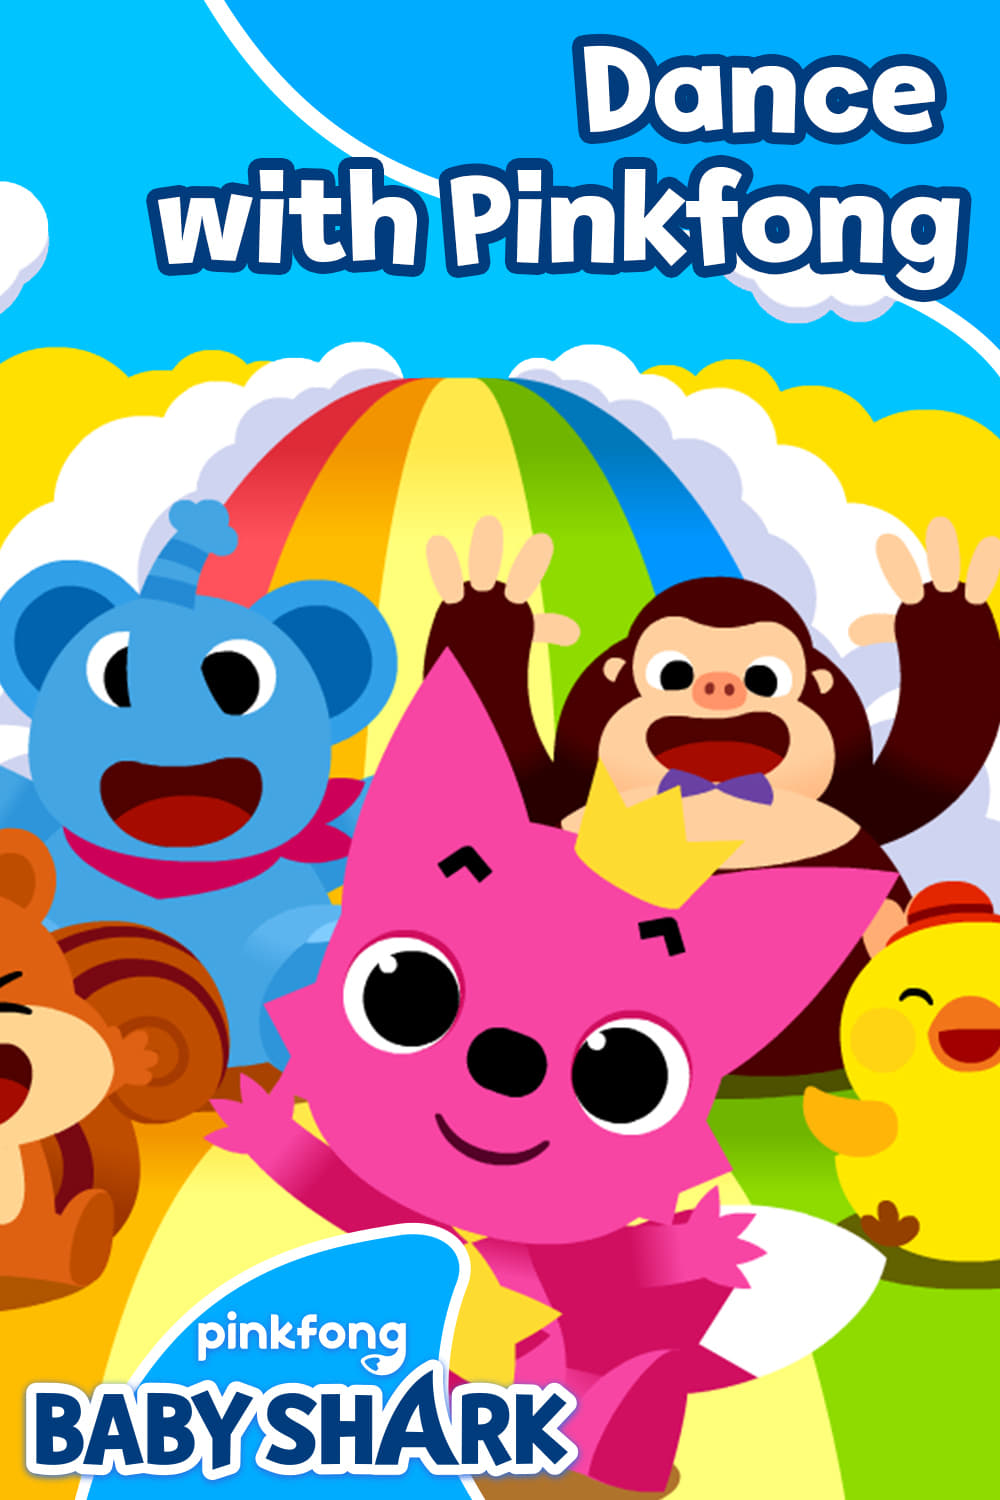 Dance with Pinkfong on FREECABLE TV